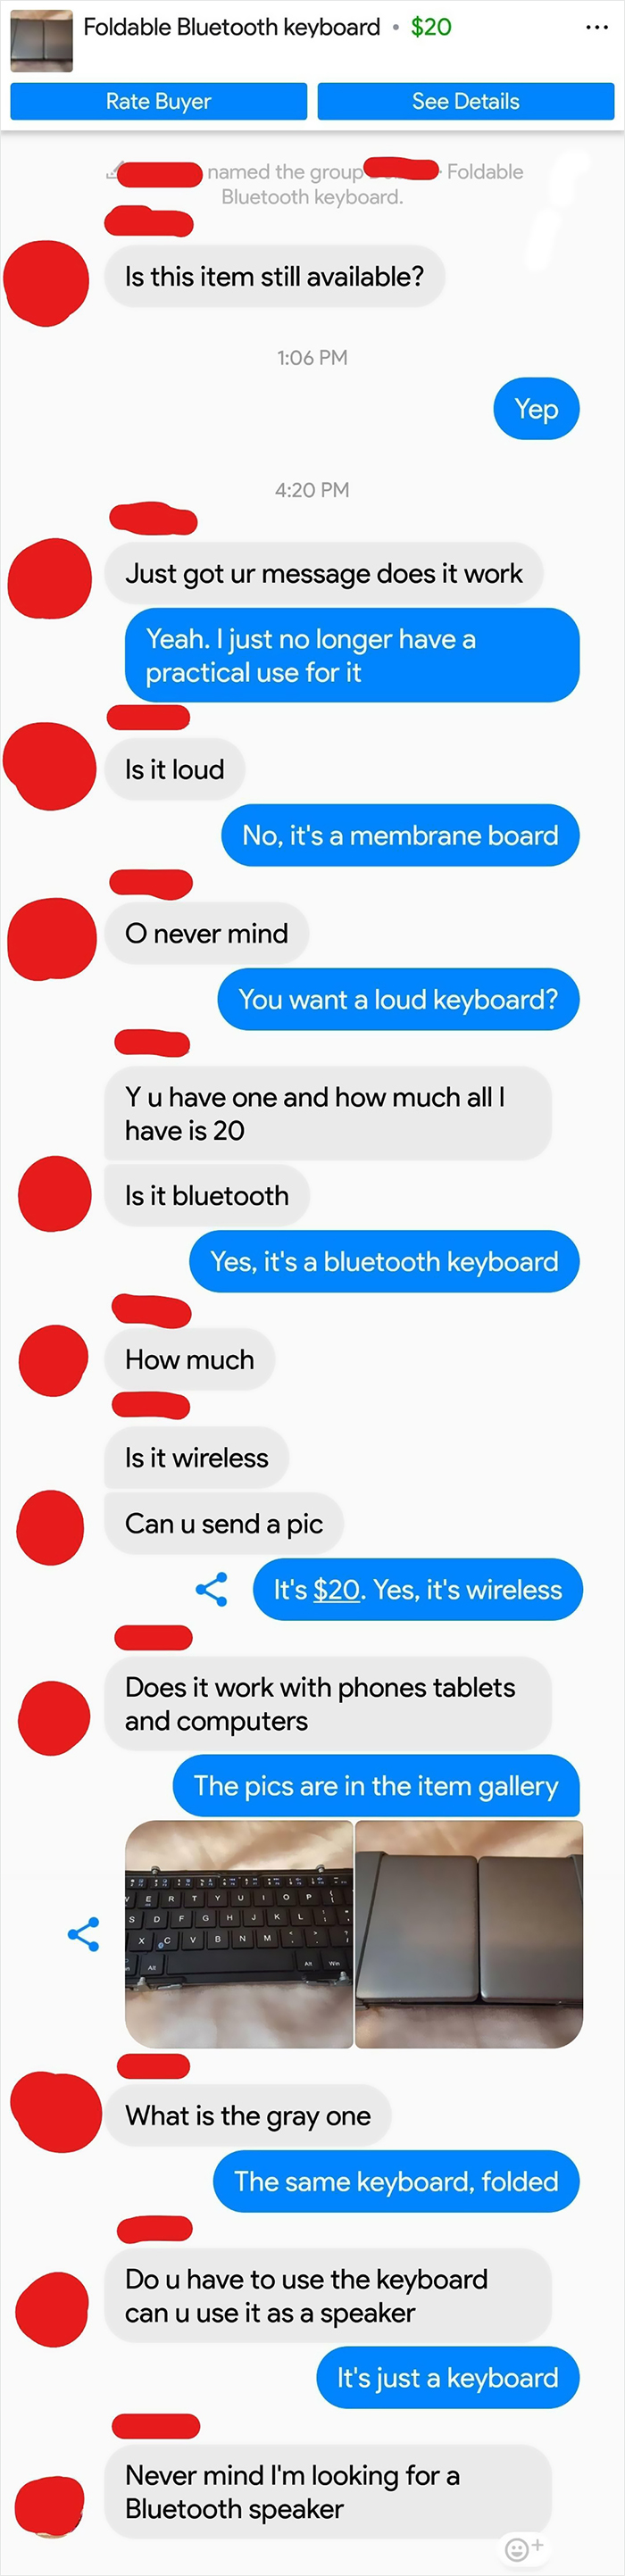 Literally Anything Bluetooth Is A Speaker